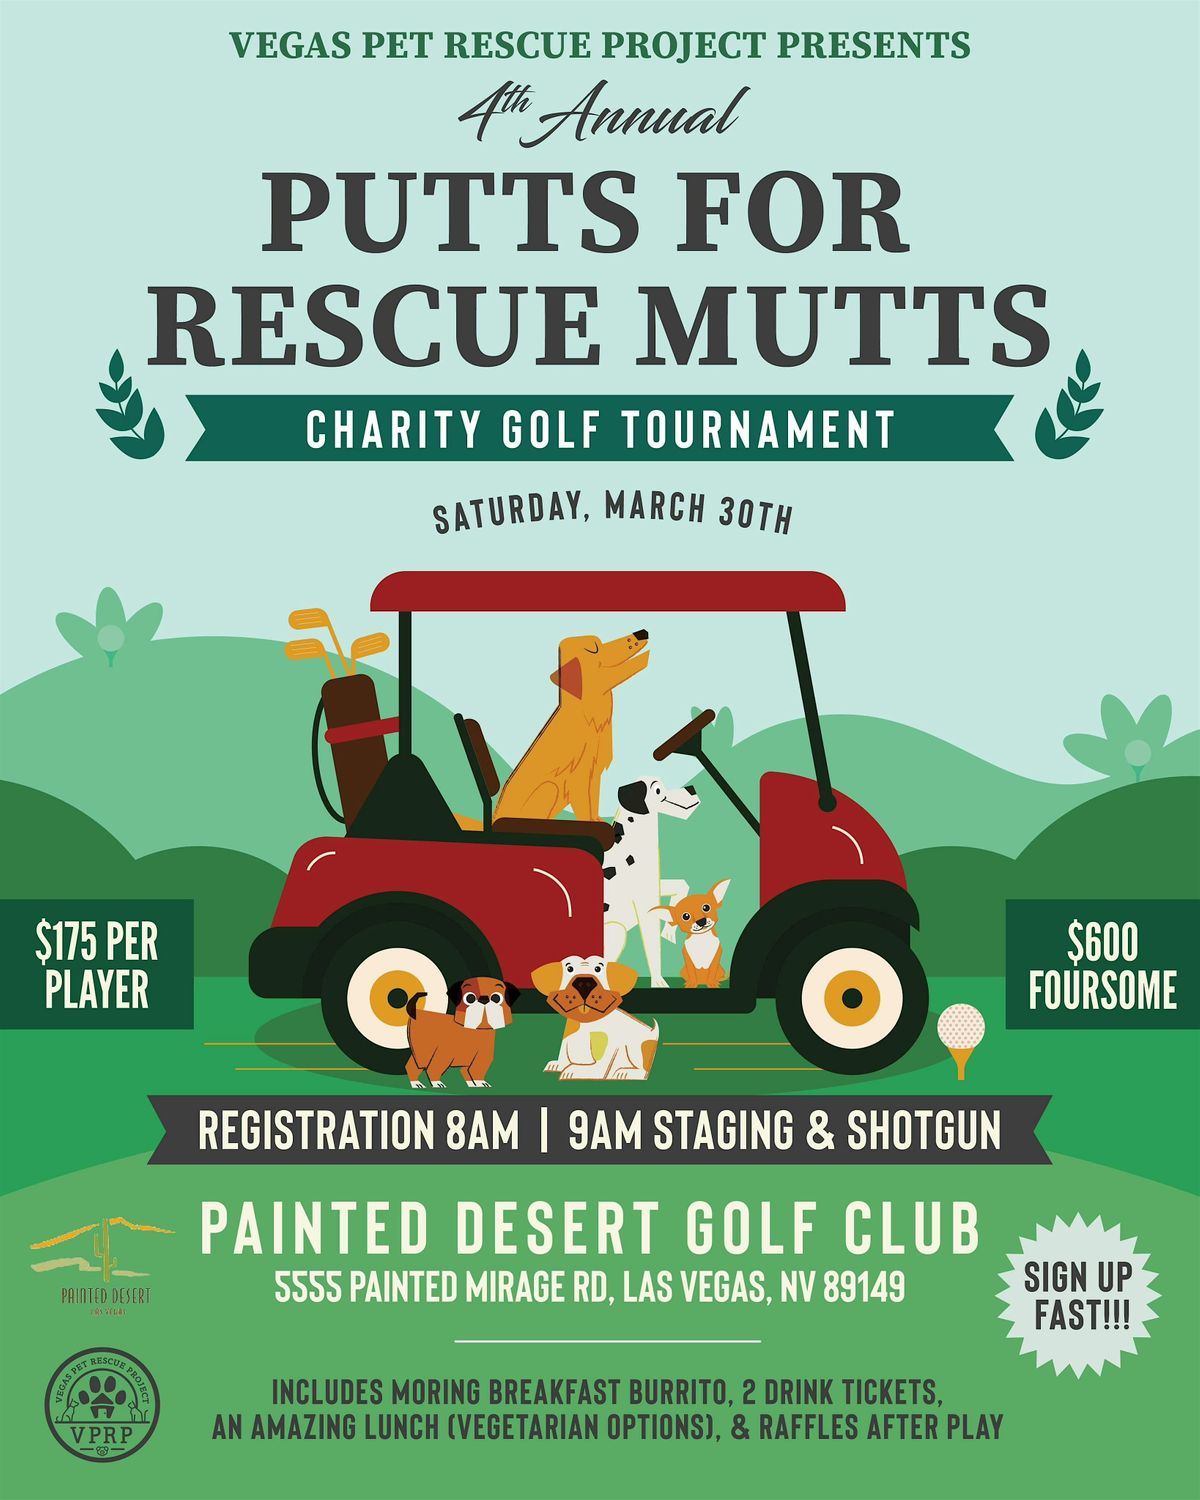 PUTTS FOR RESCUE MUTTS 4th ANNUAL CHARITY GOLF TOURNAMENT